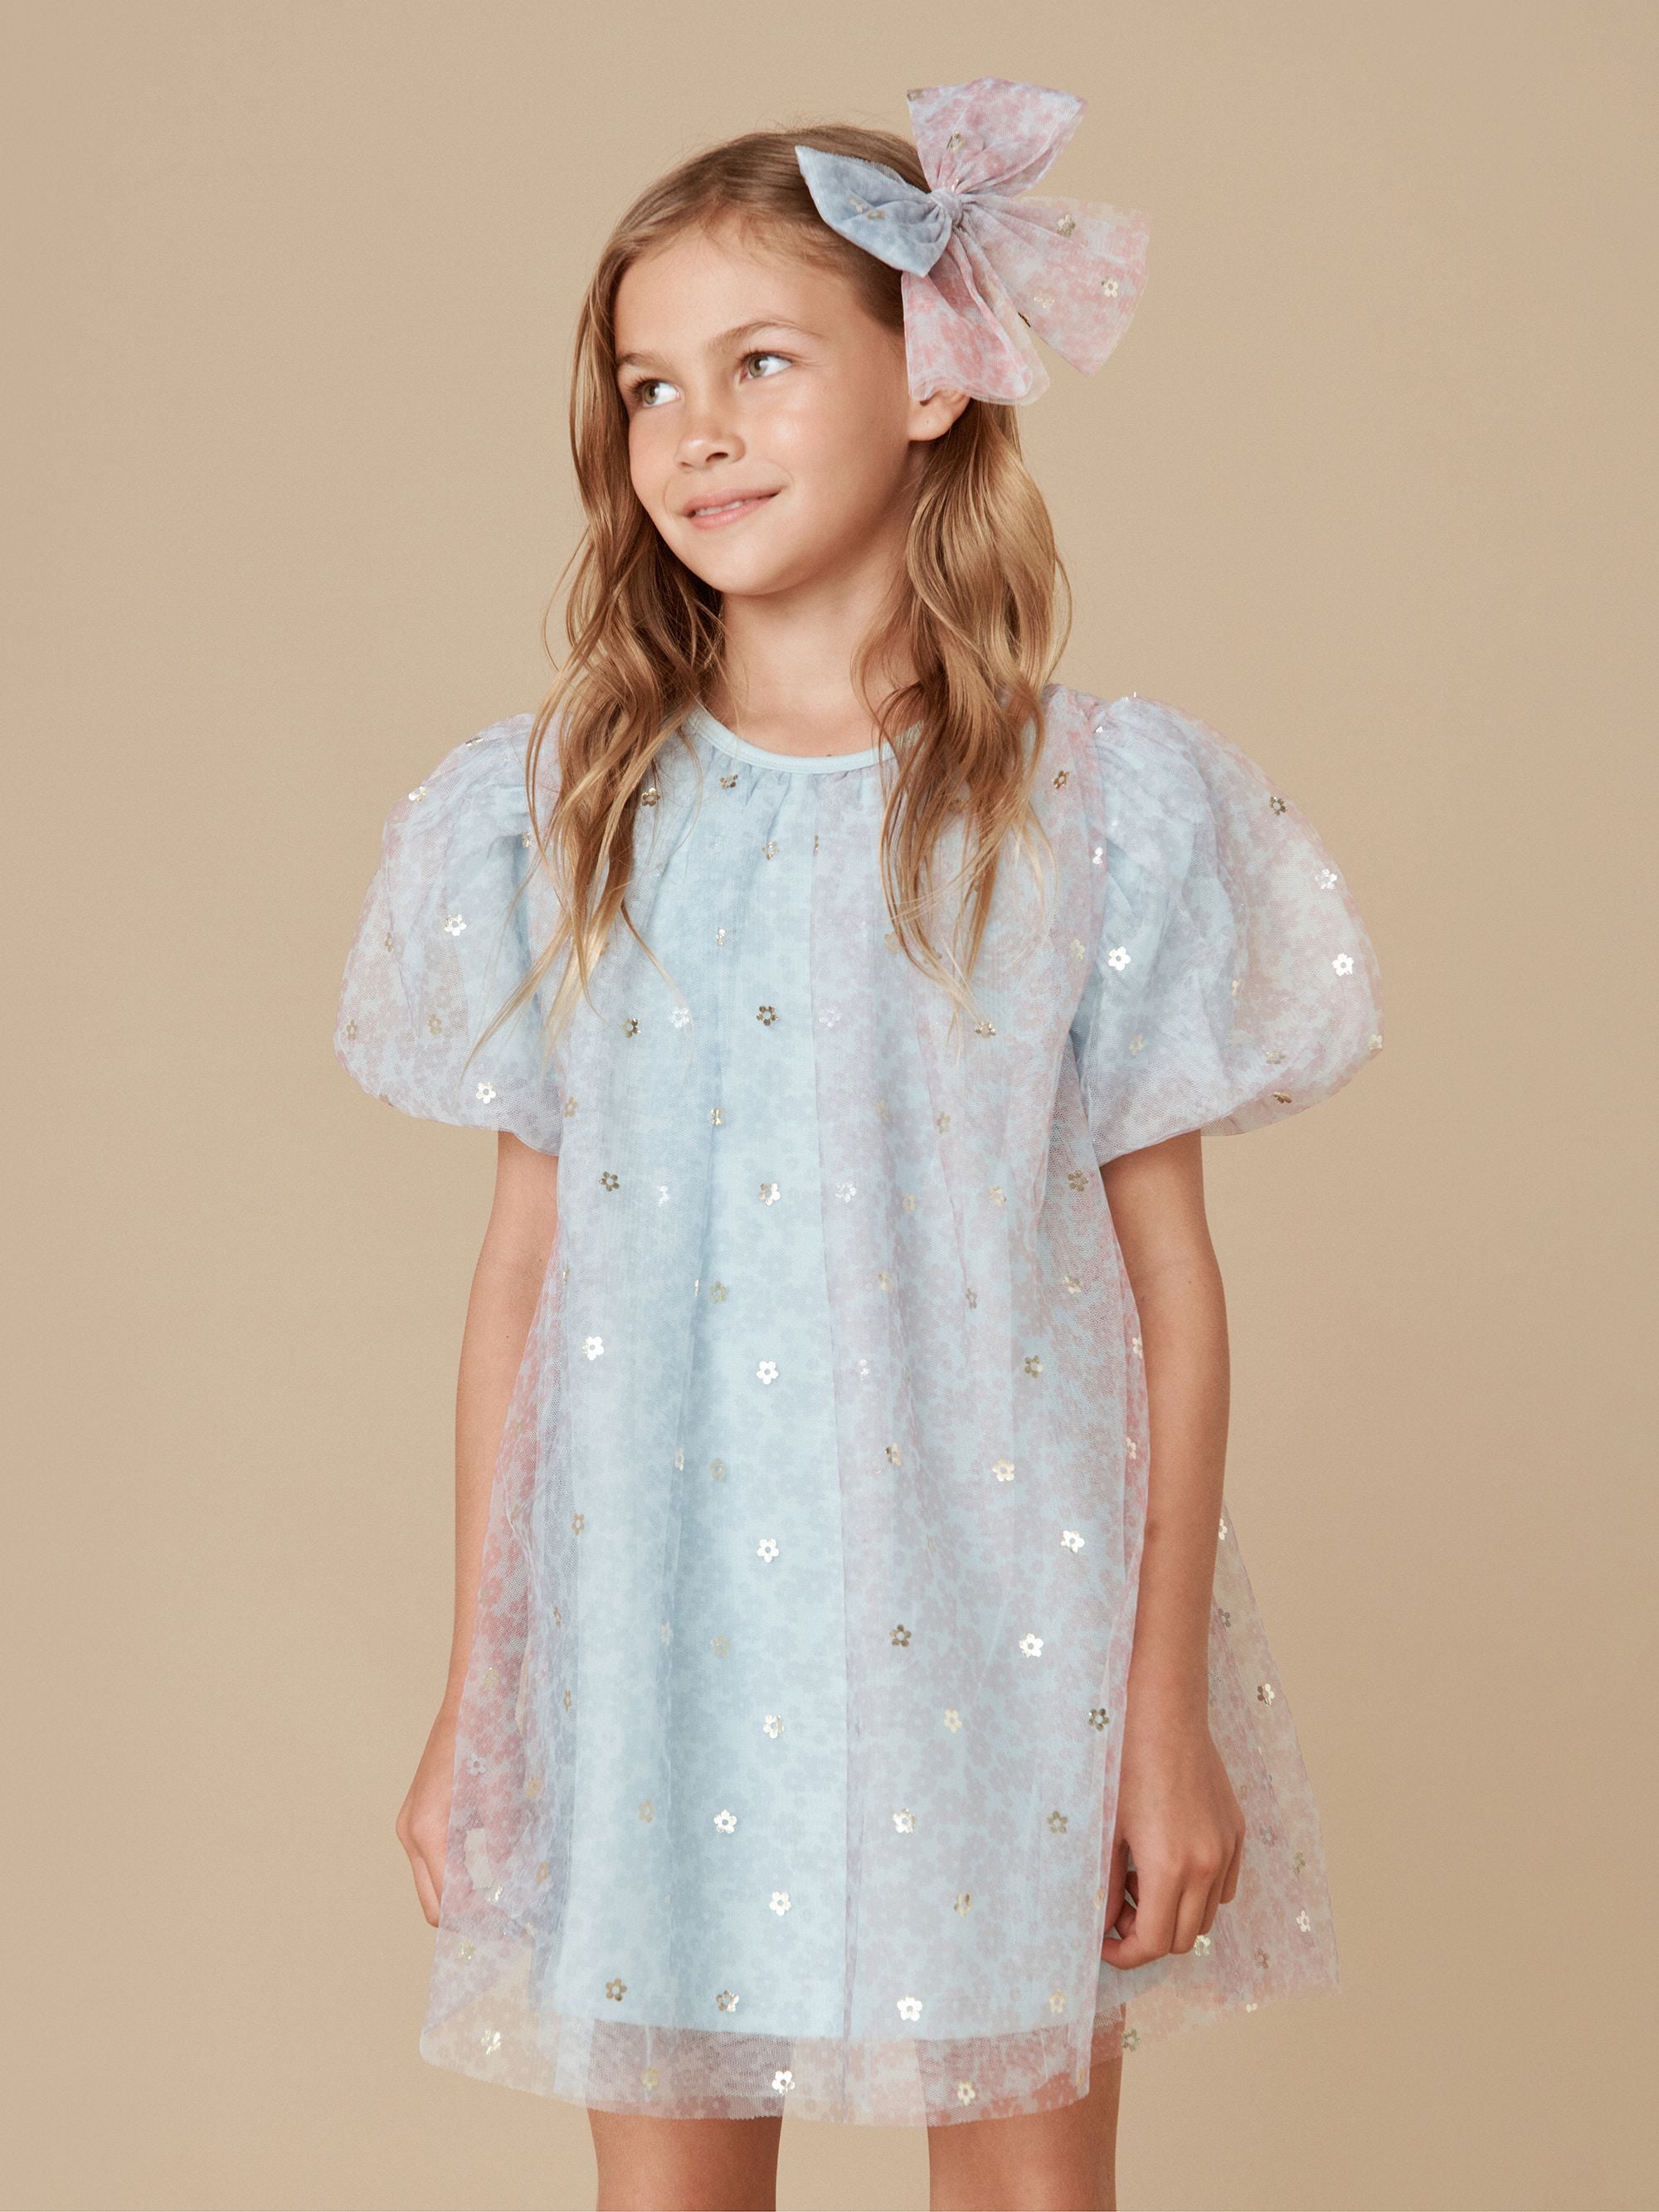 Huxbaby Party Dress - Rainbow Flower Tulle